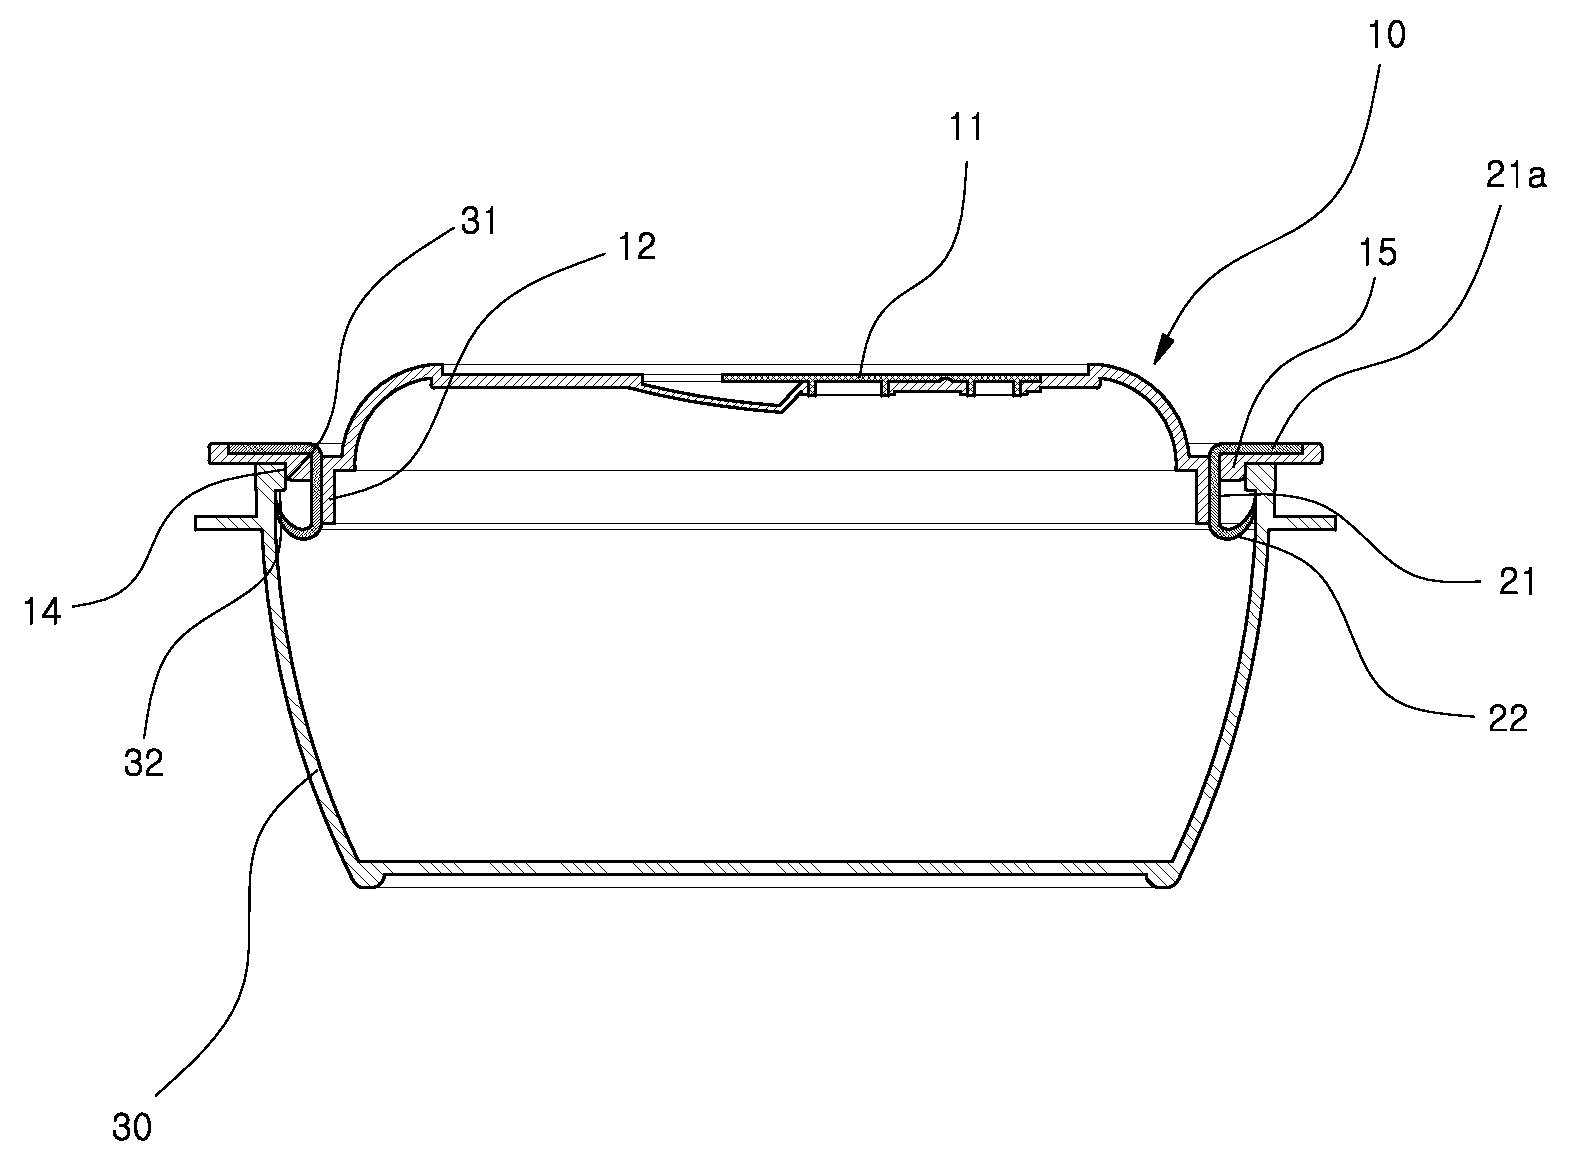 Receptacle with lid integrally formed with packing having wing section